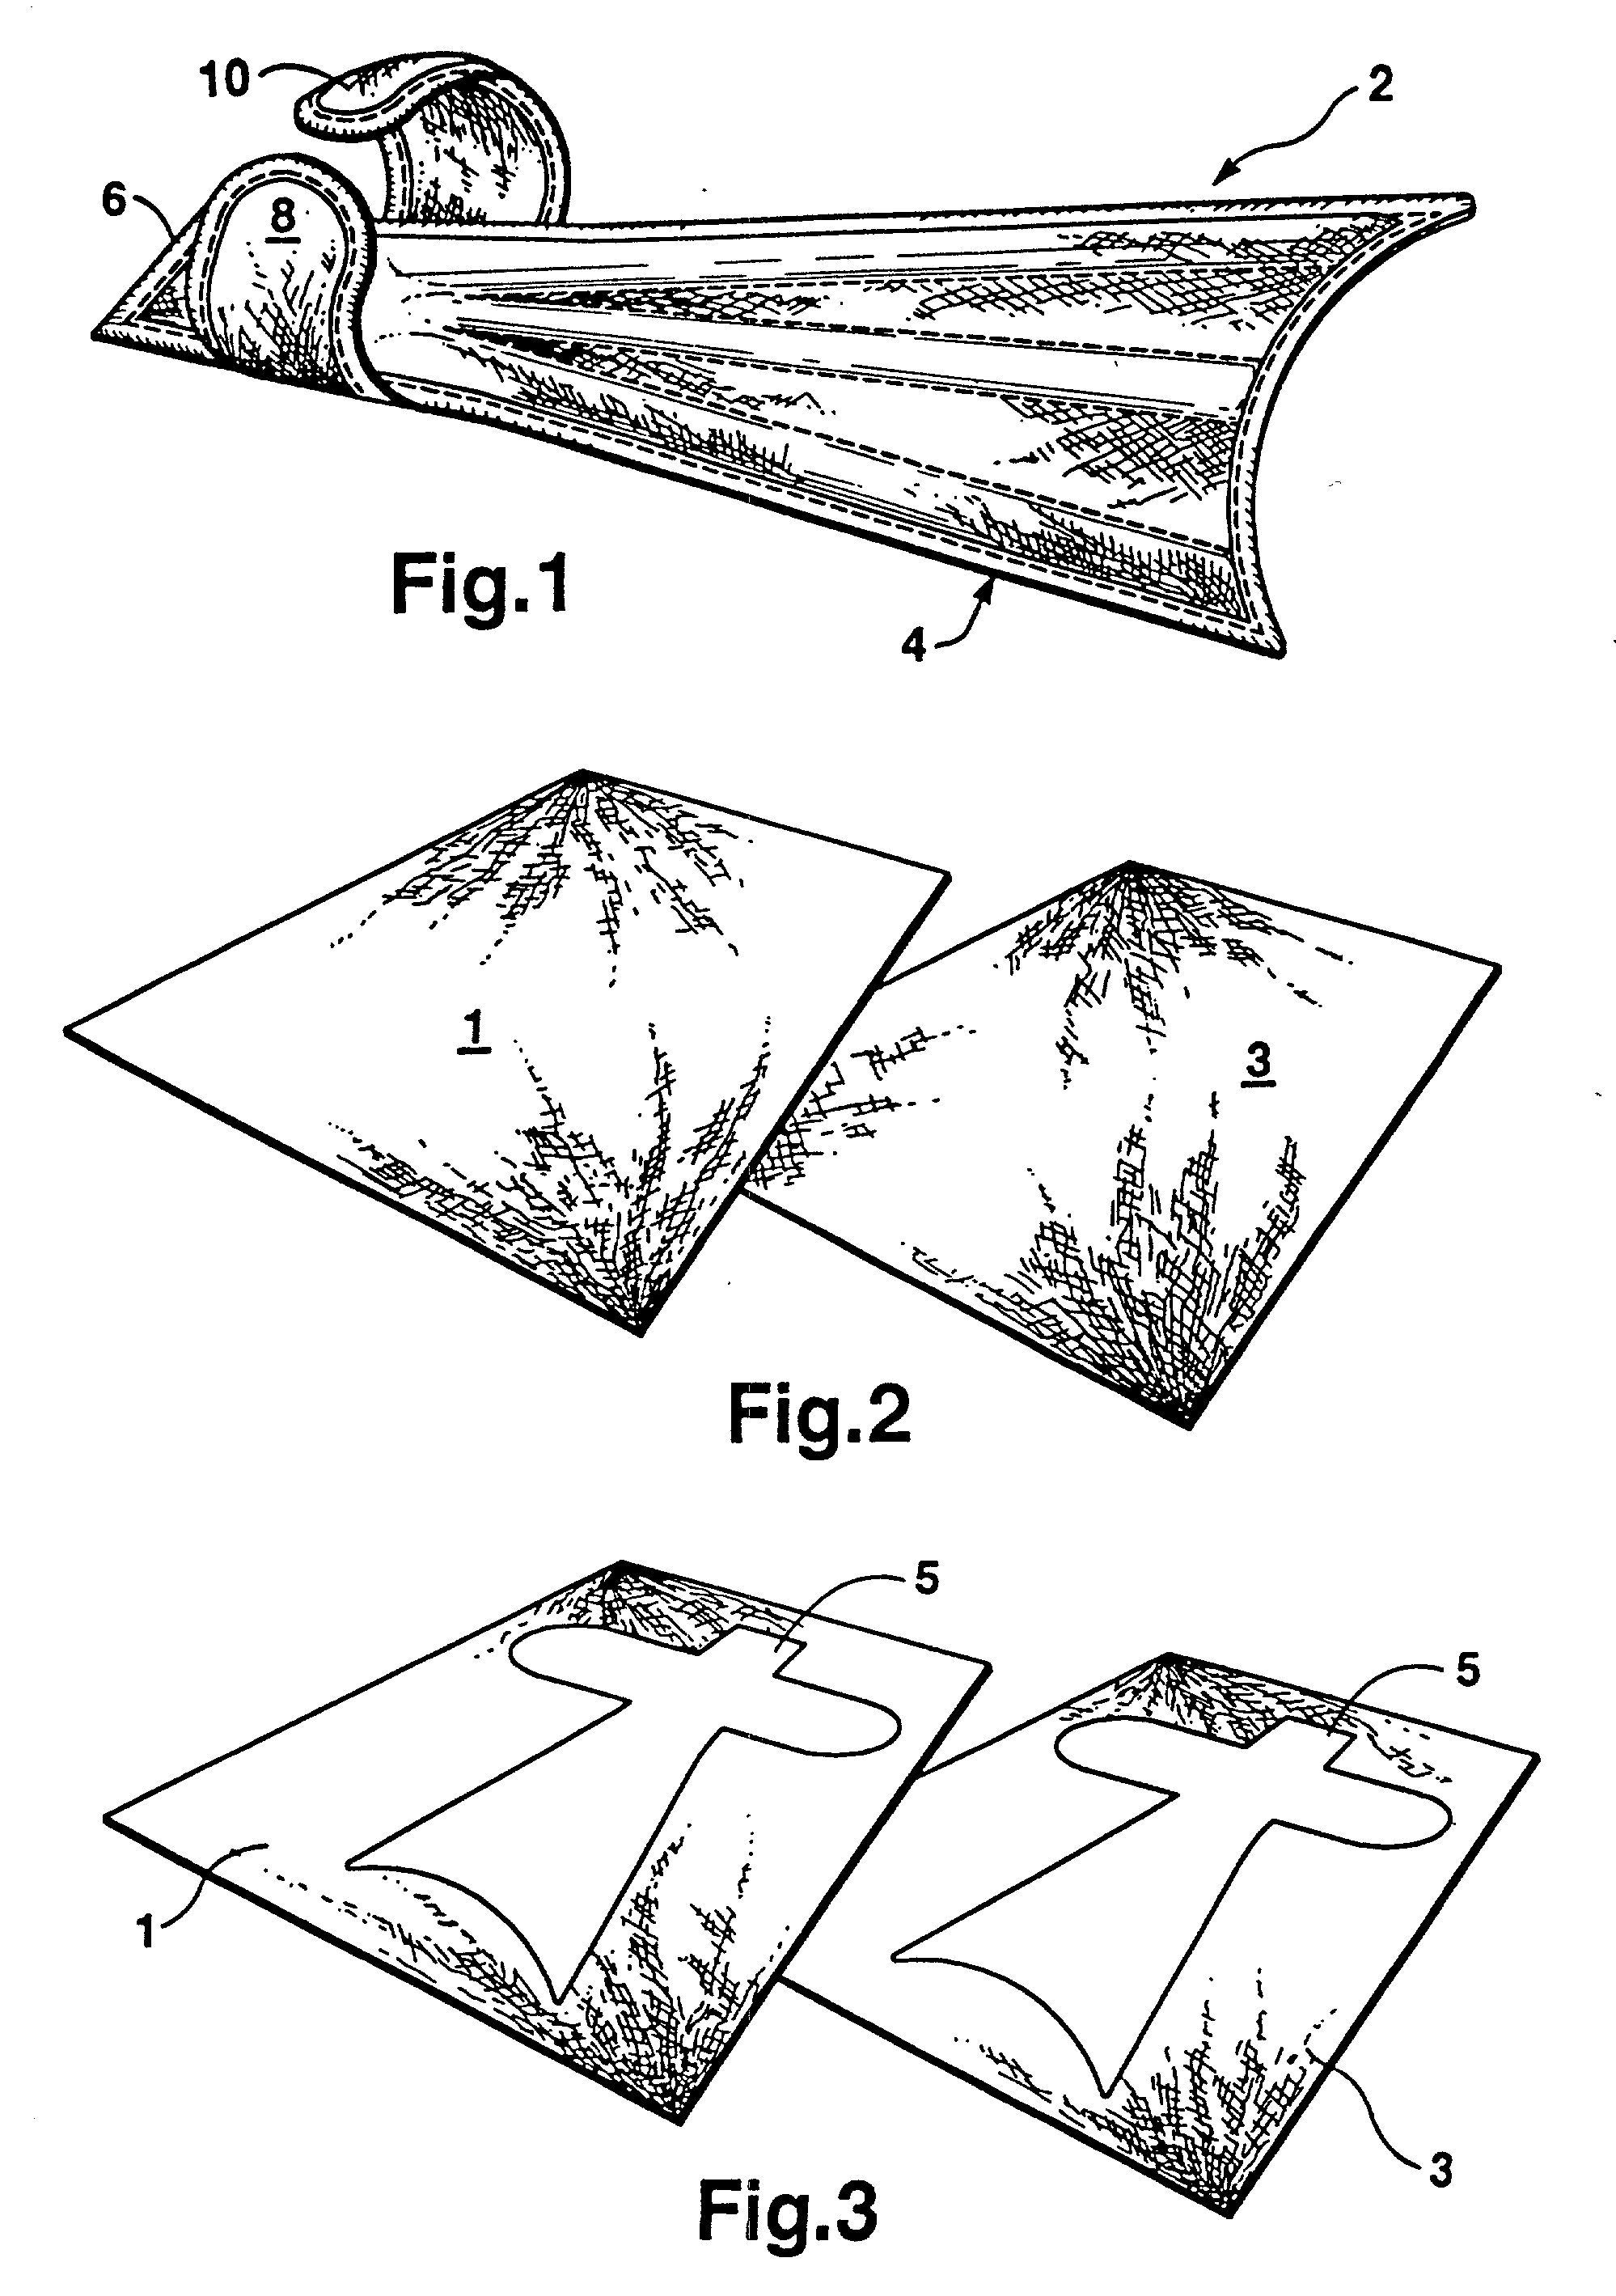 Non-mold method of forming objects and articles formed thereby